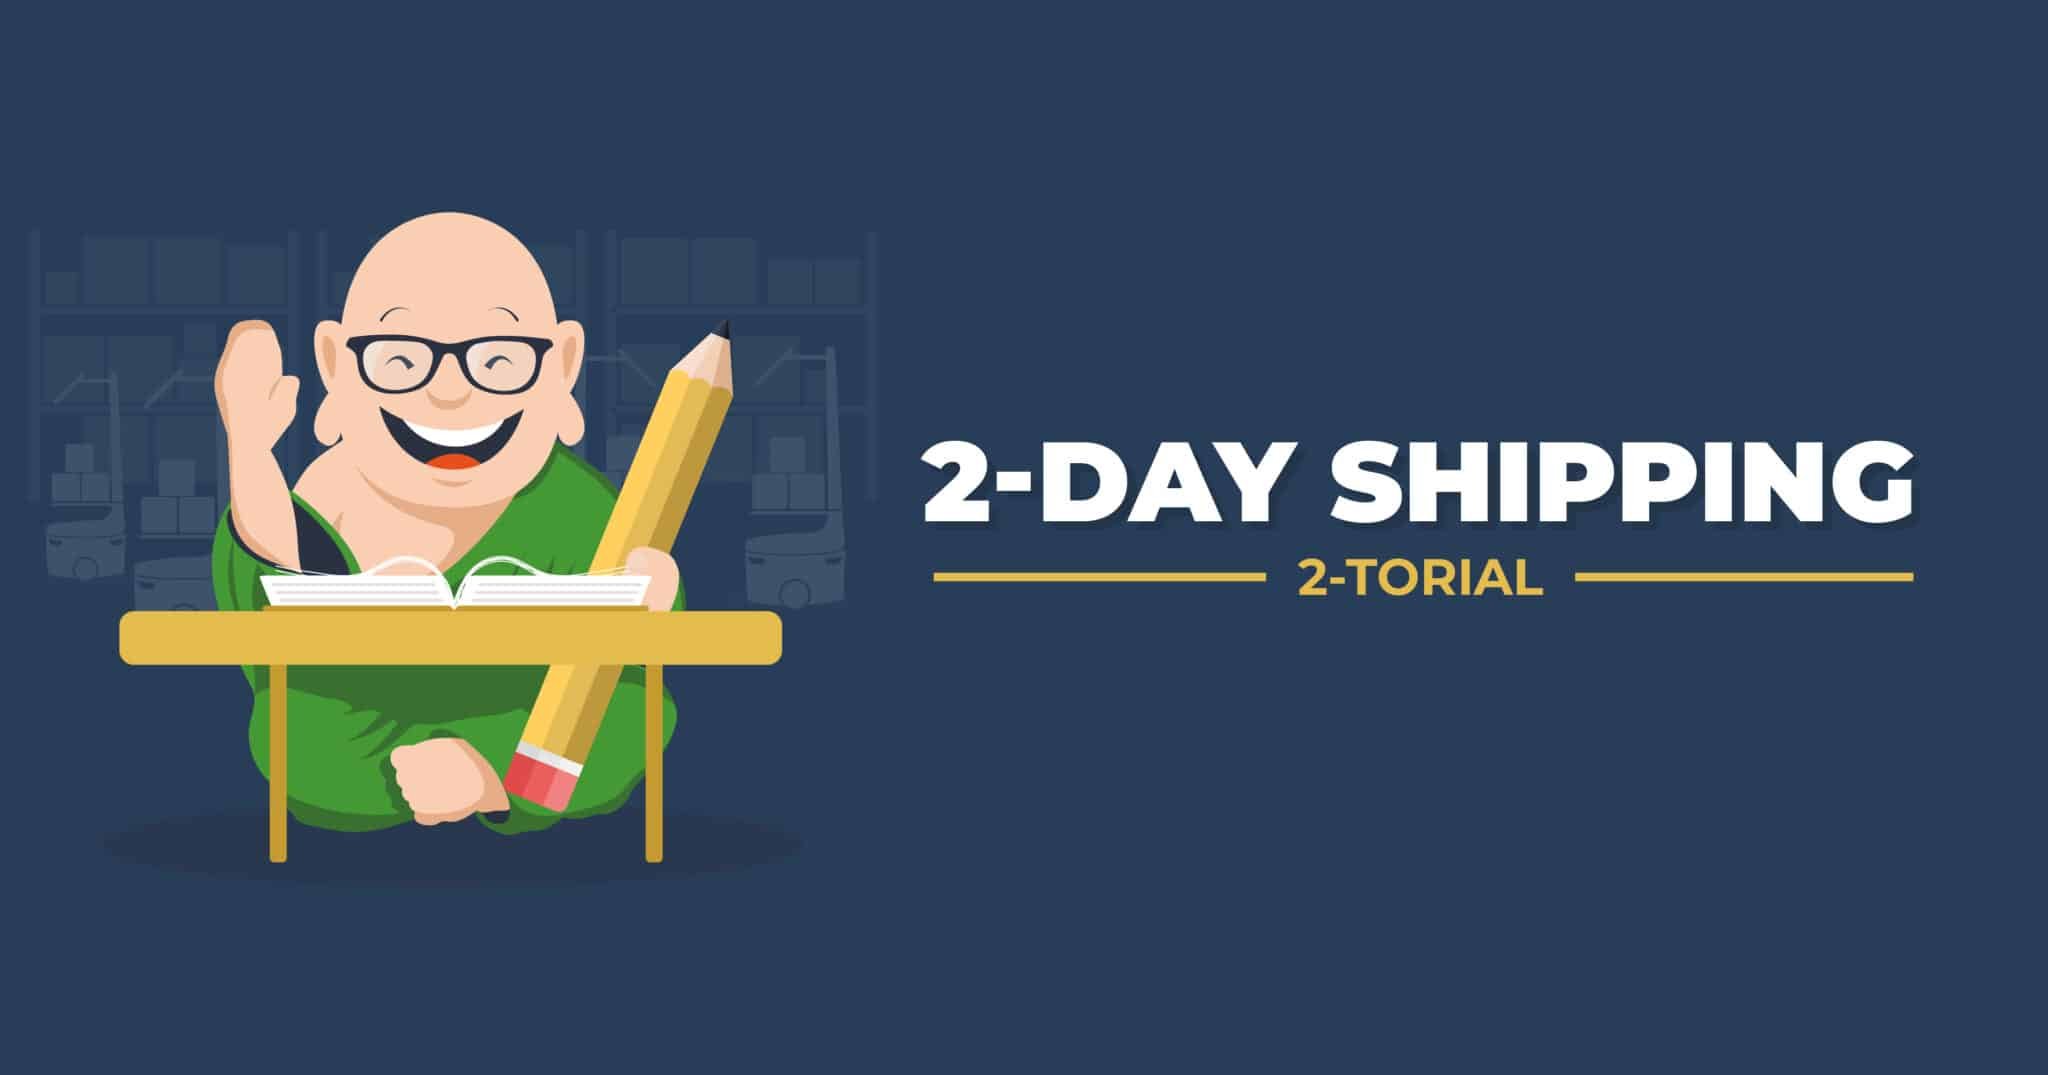 2-Day Shipping 2-torial